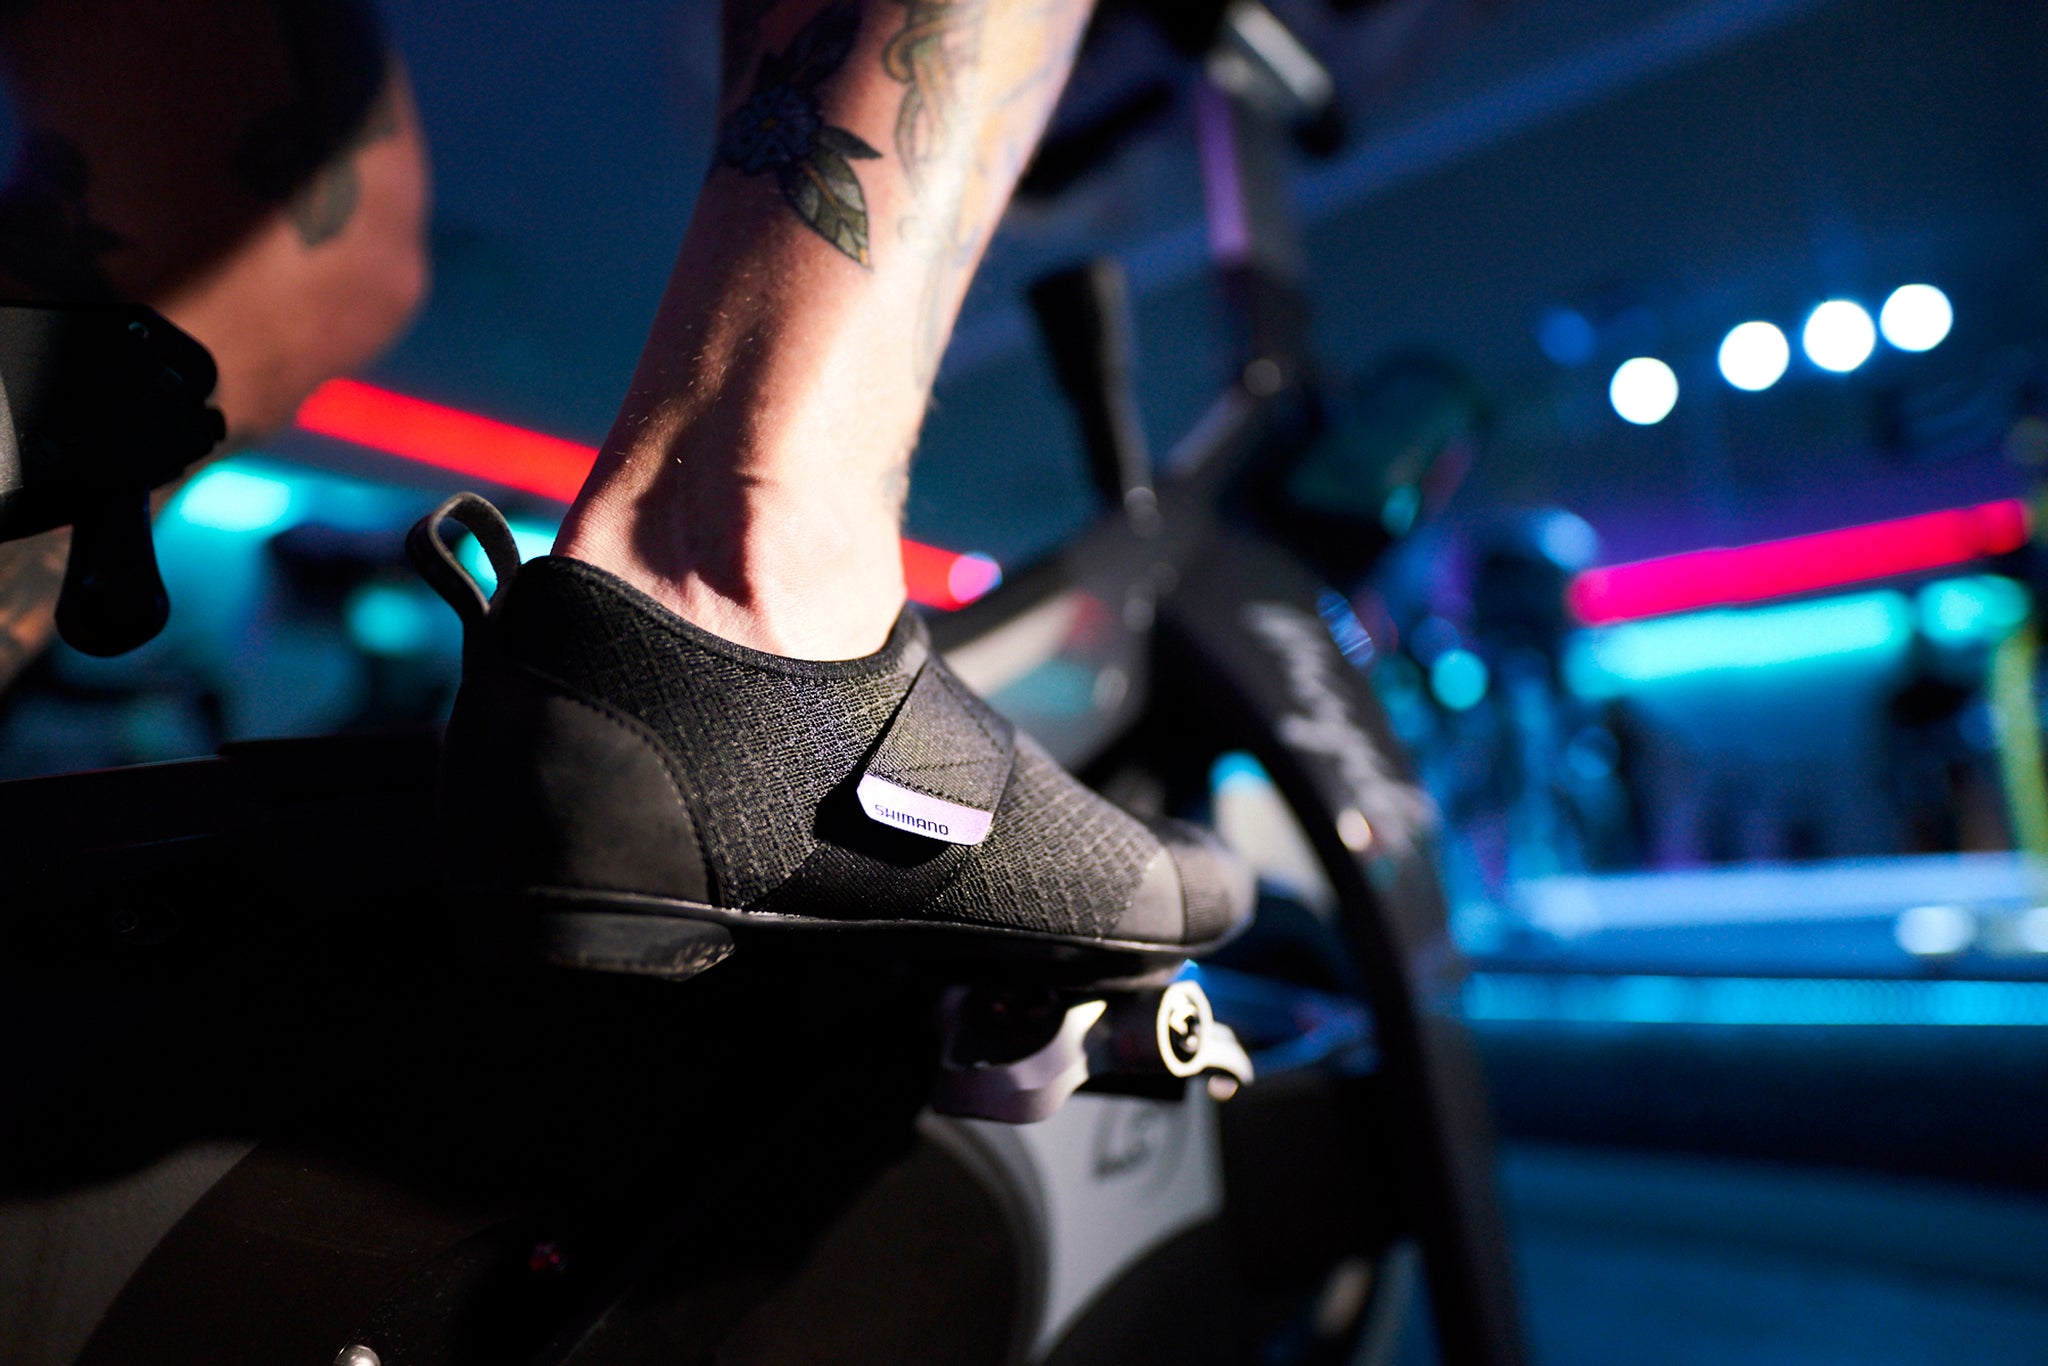 Shimano Indoor Cycling shoe clipped into a stages bike